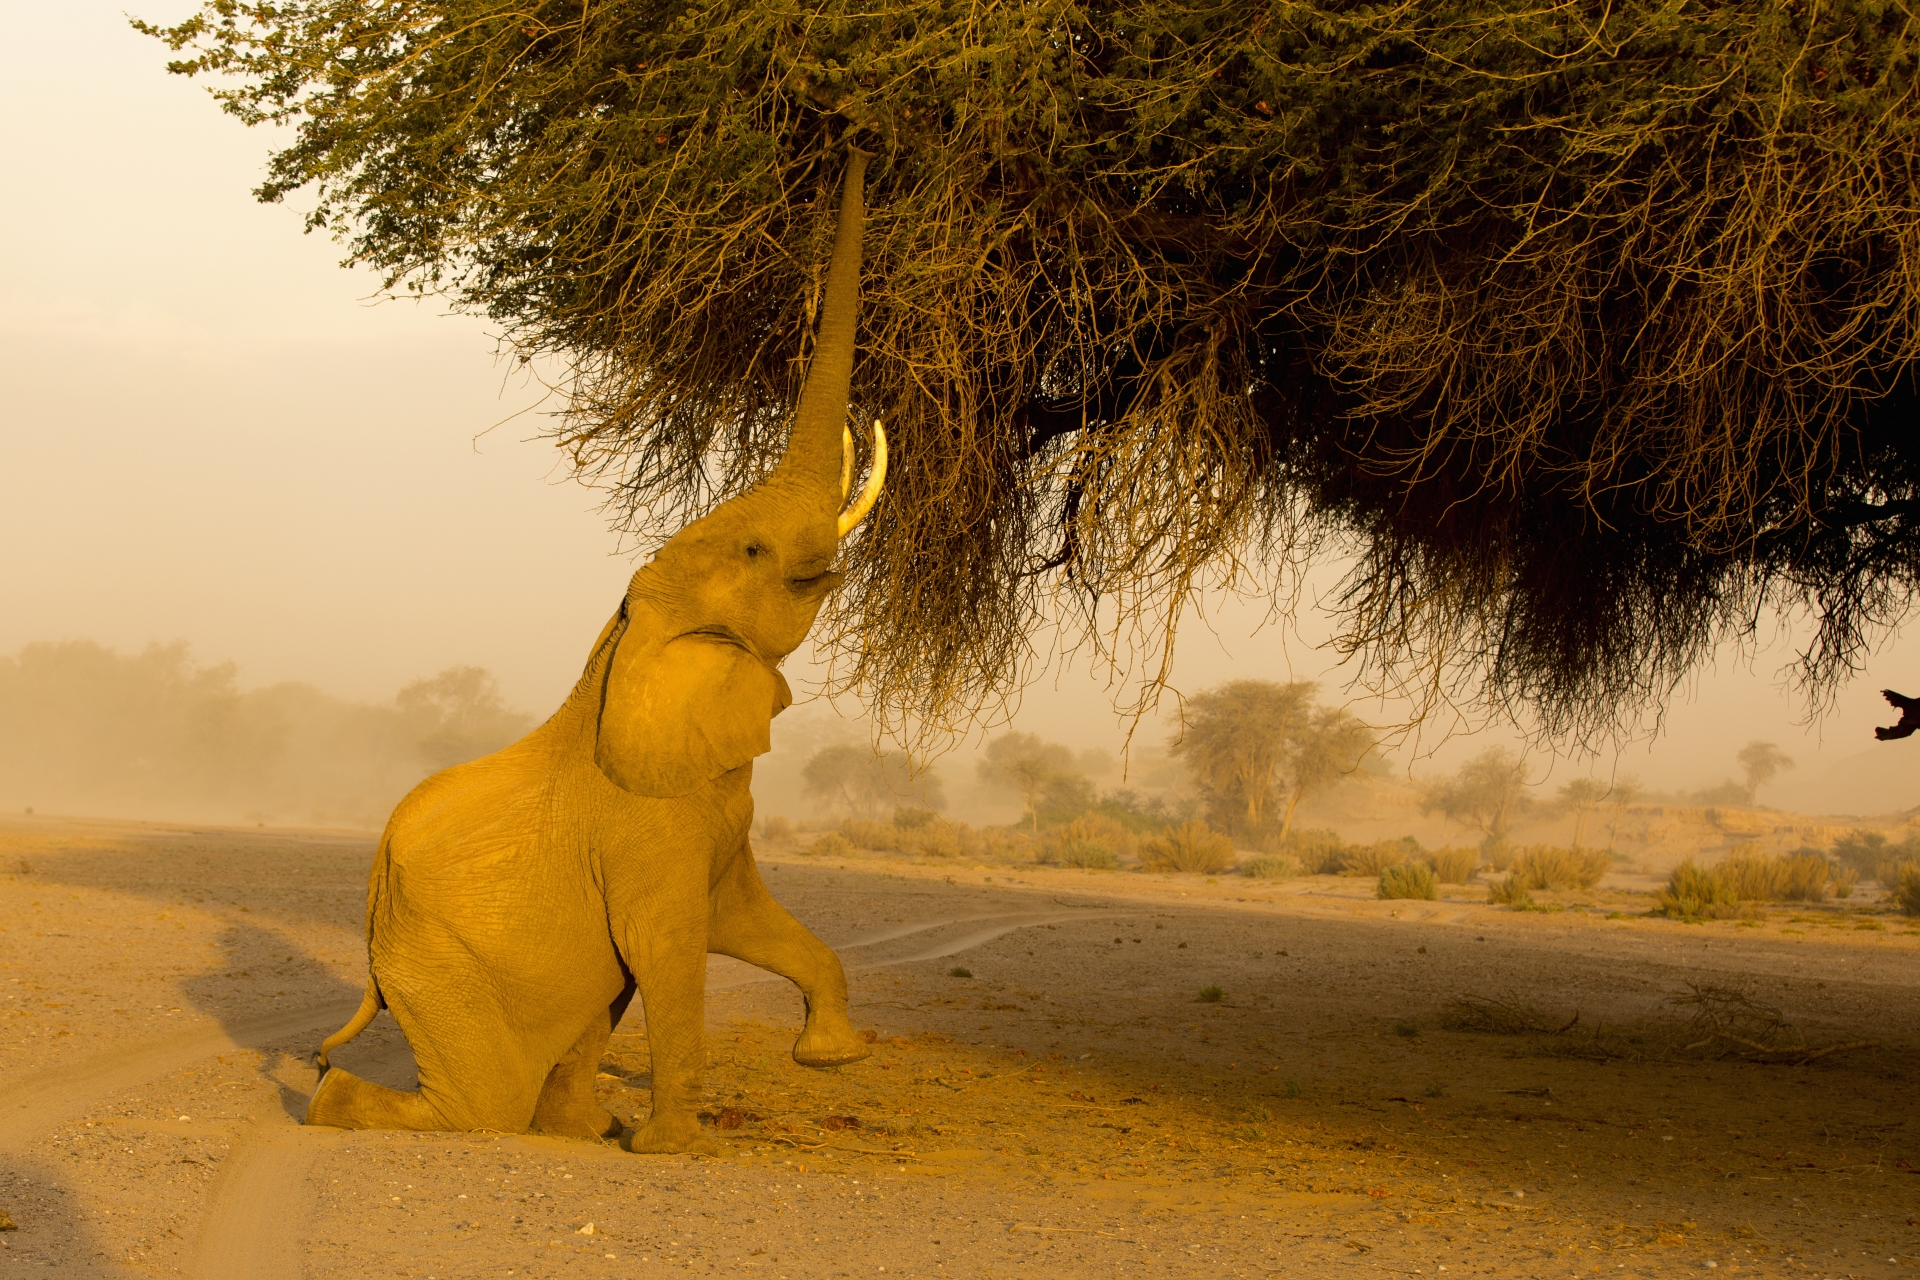 Desert adapted elephant - Namibia for Teenagers